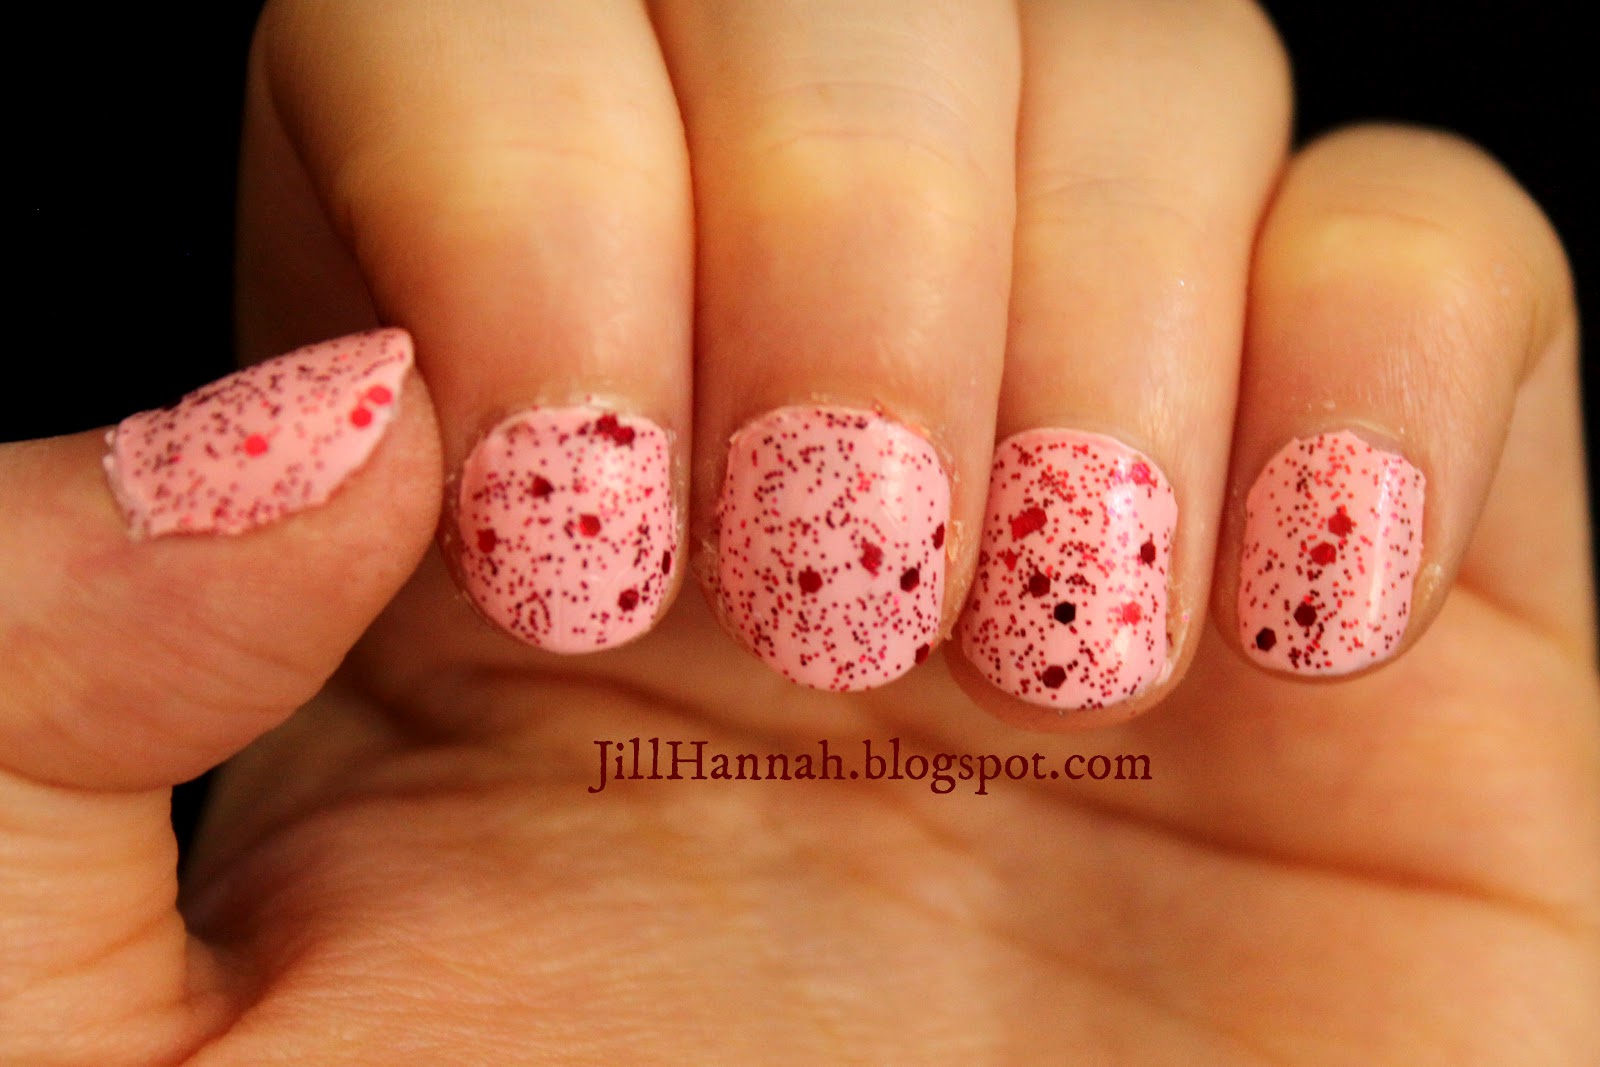 Strawberry Cheesecake Jelly Belly Nail Polish Coincidence